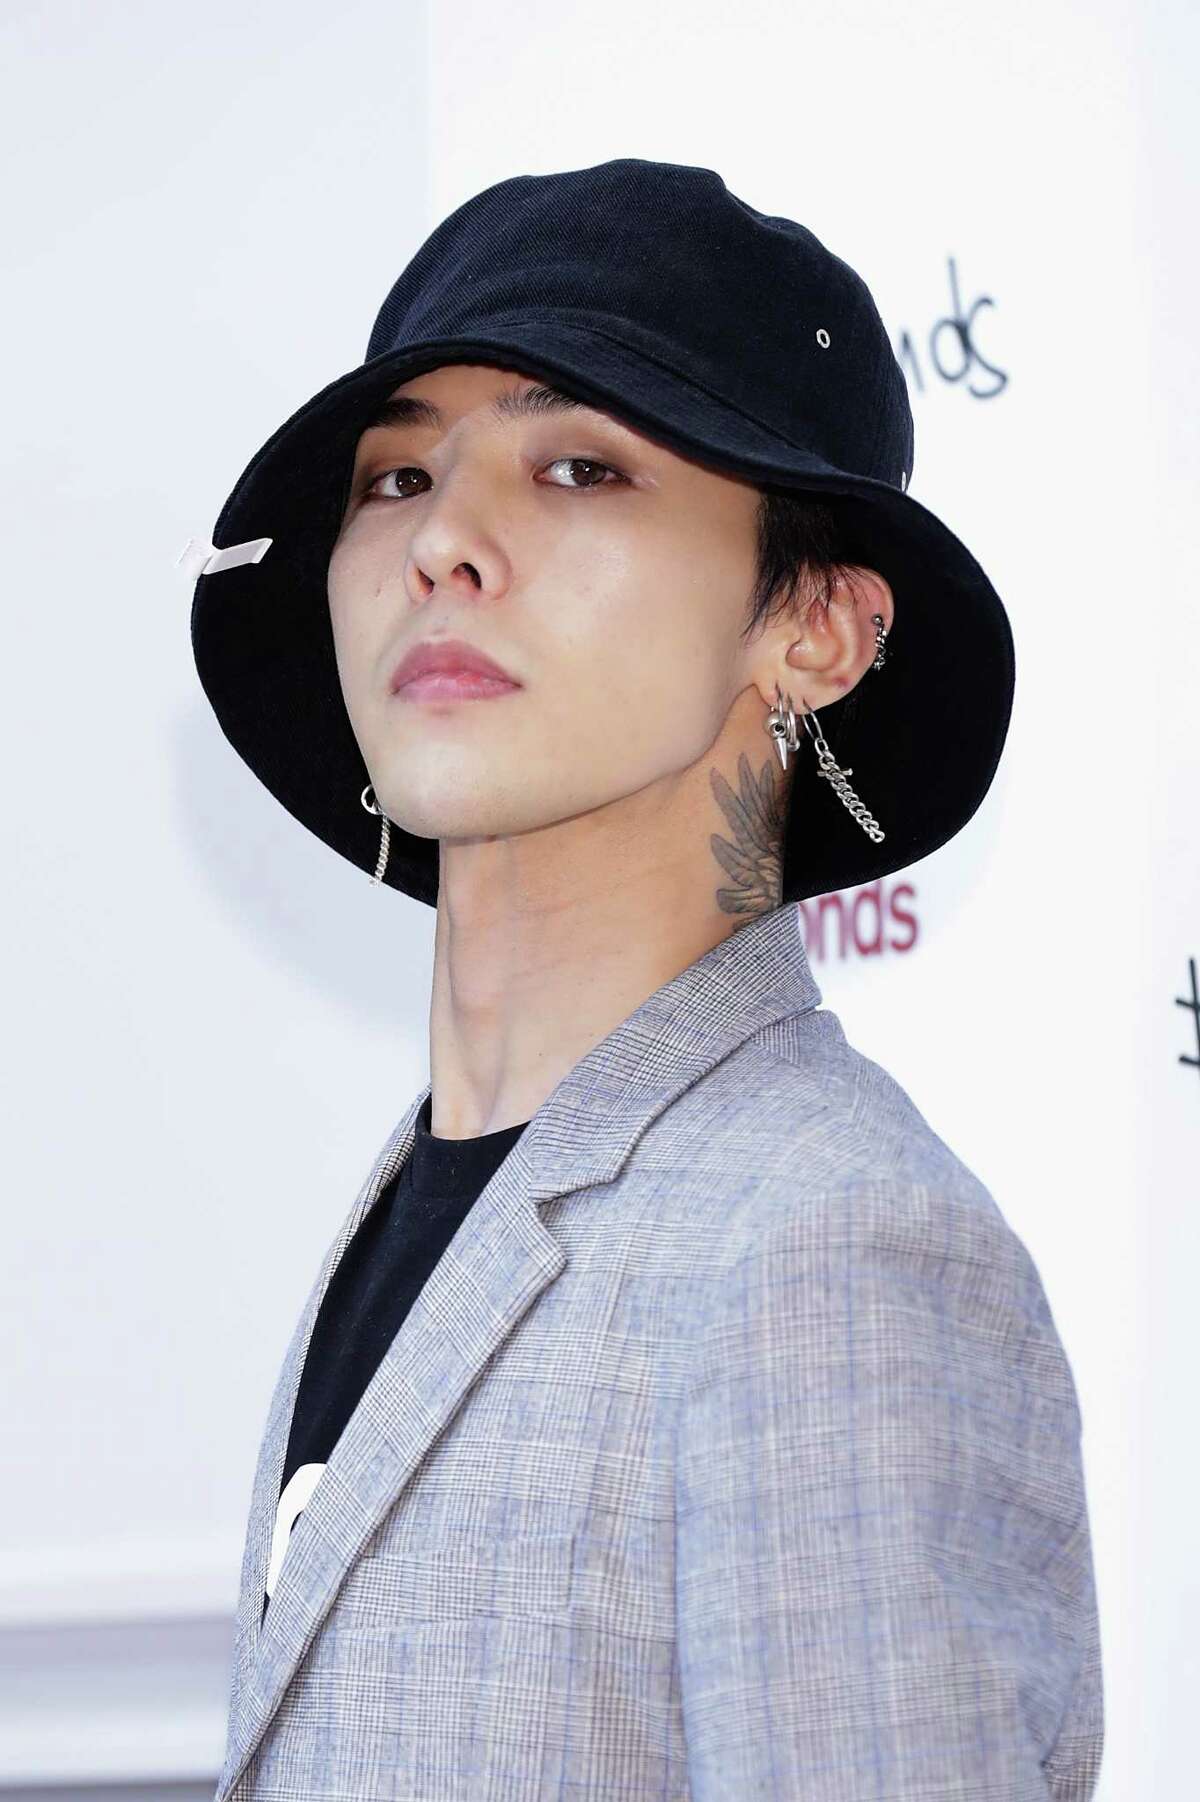 Nine things you need to know about G-Dragon, the K-pop superstar playing Toyota Center